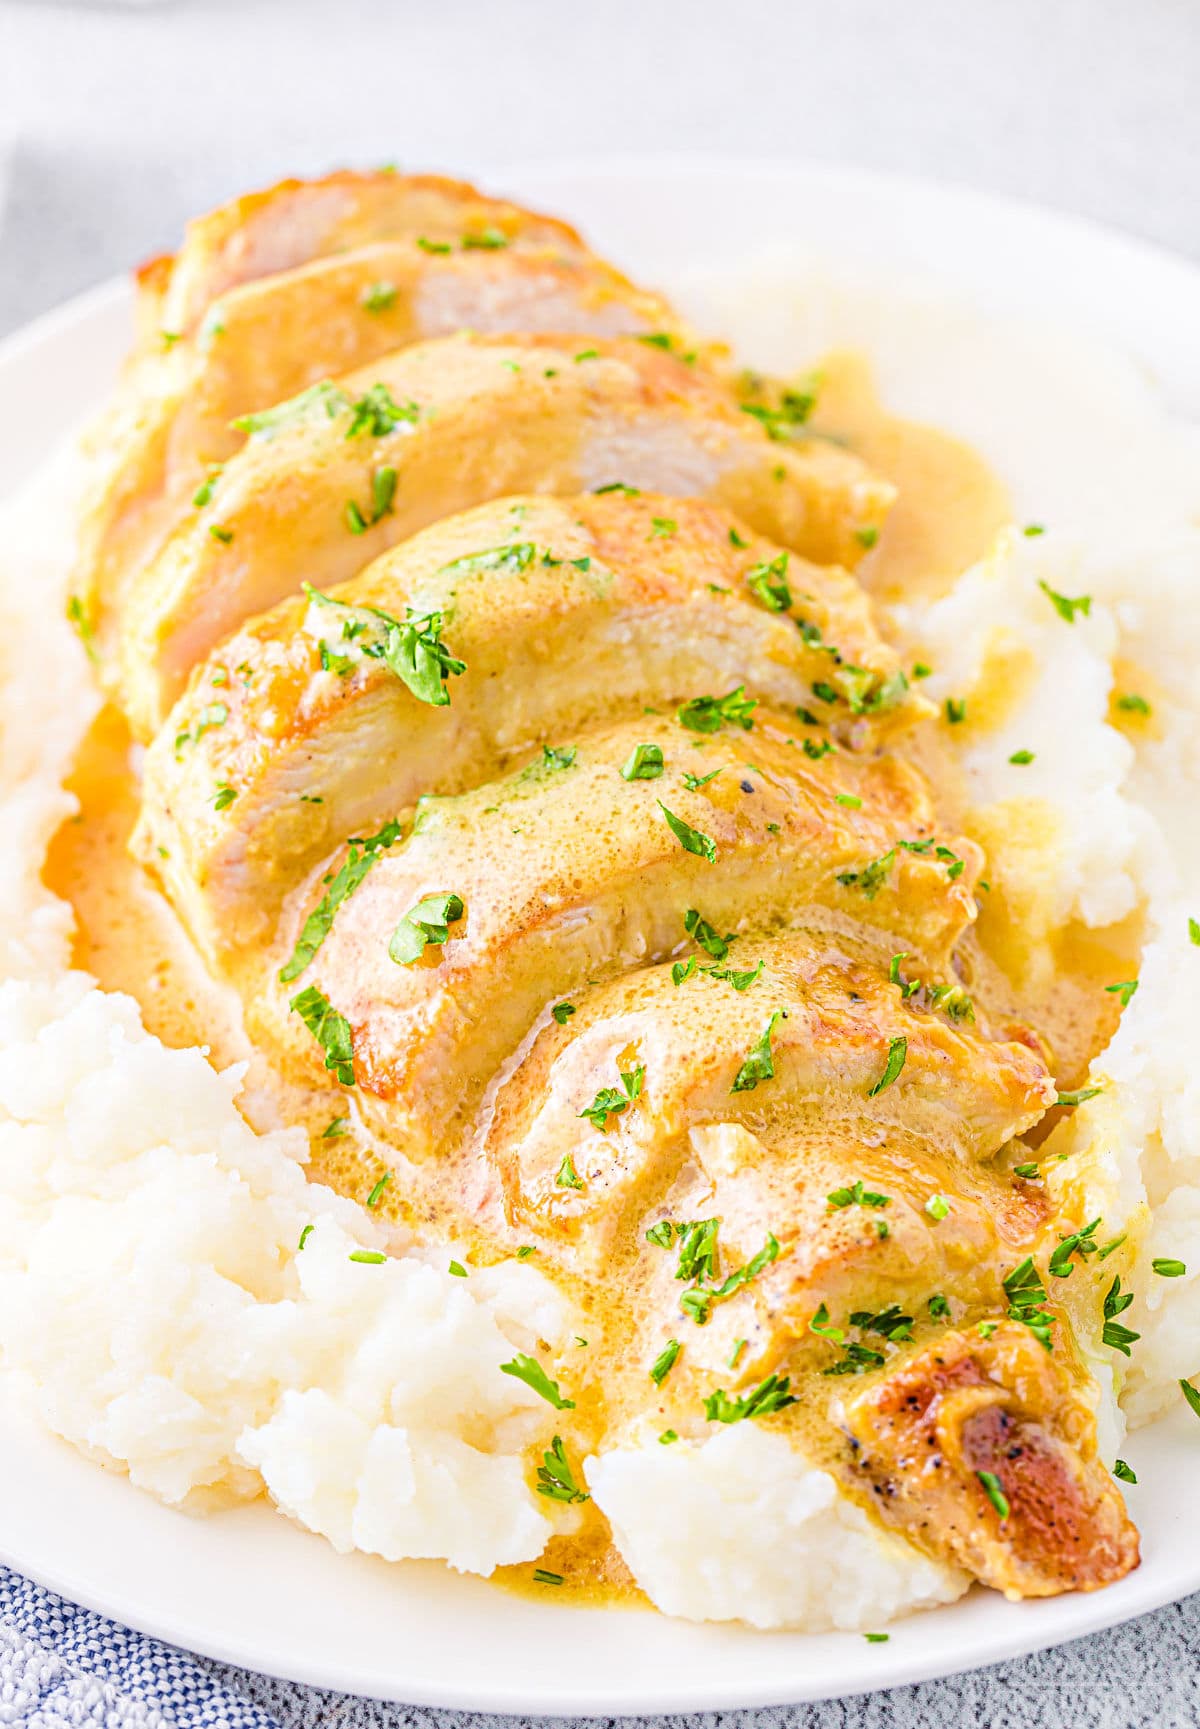 close up look at sliced chicken breast with honey mustard sauce sitting on a bed of mashed potatoes on a white plate.